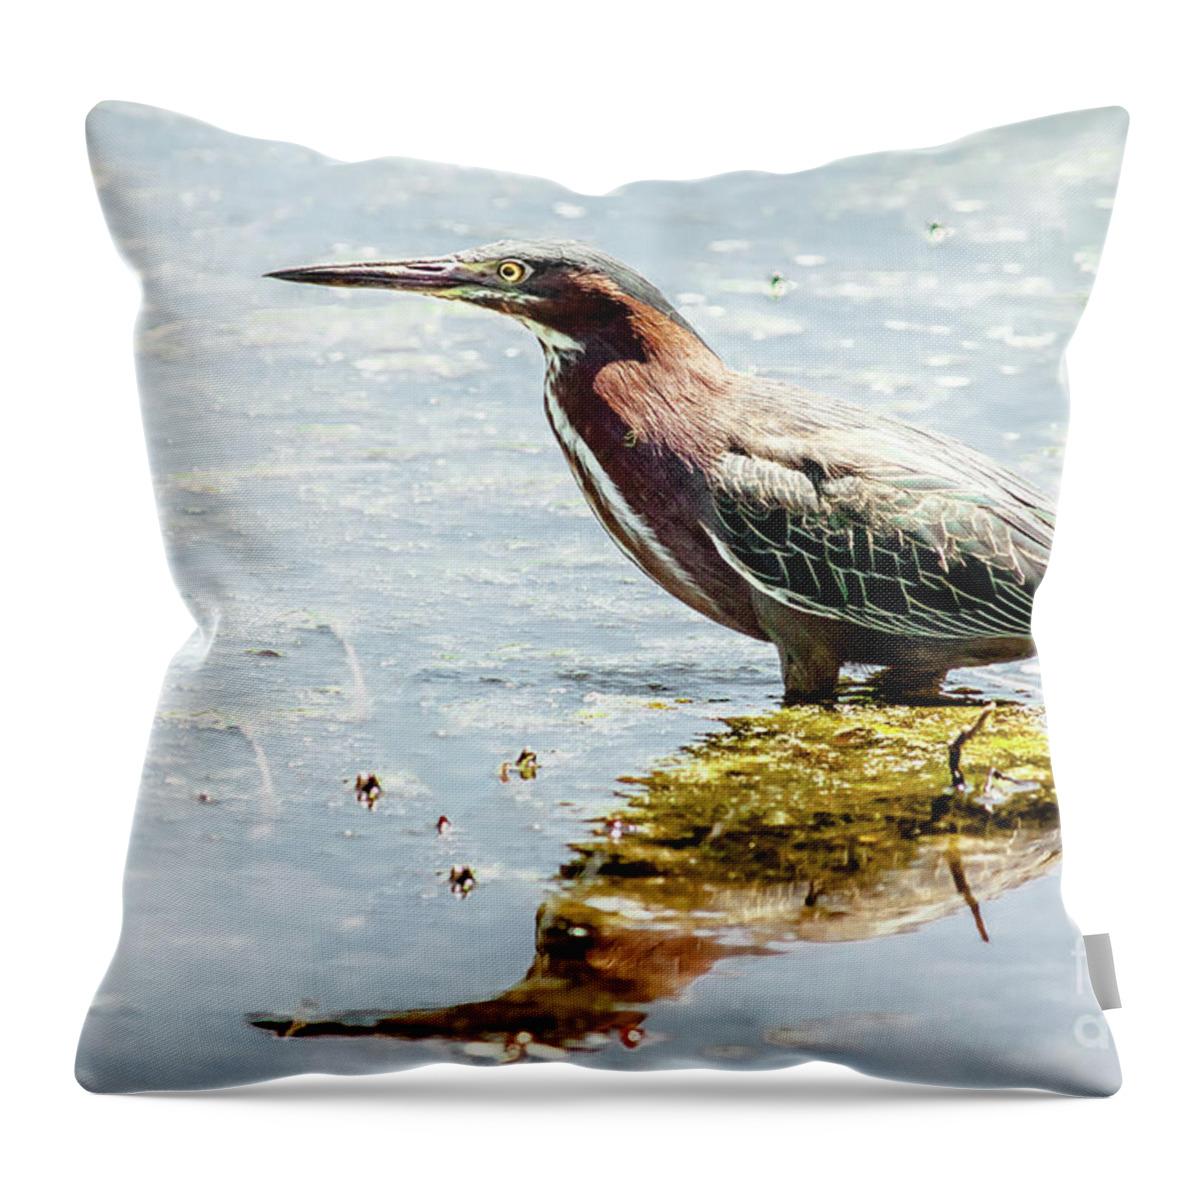 Wildlife Throw Pillow featuring the photograph Green Heron Bright Day by Robert Frederick